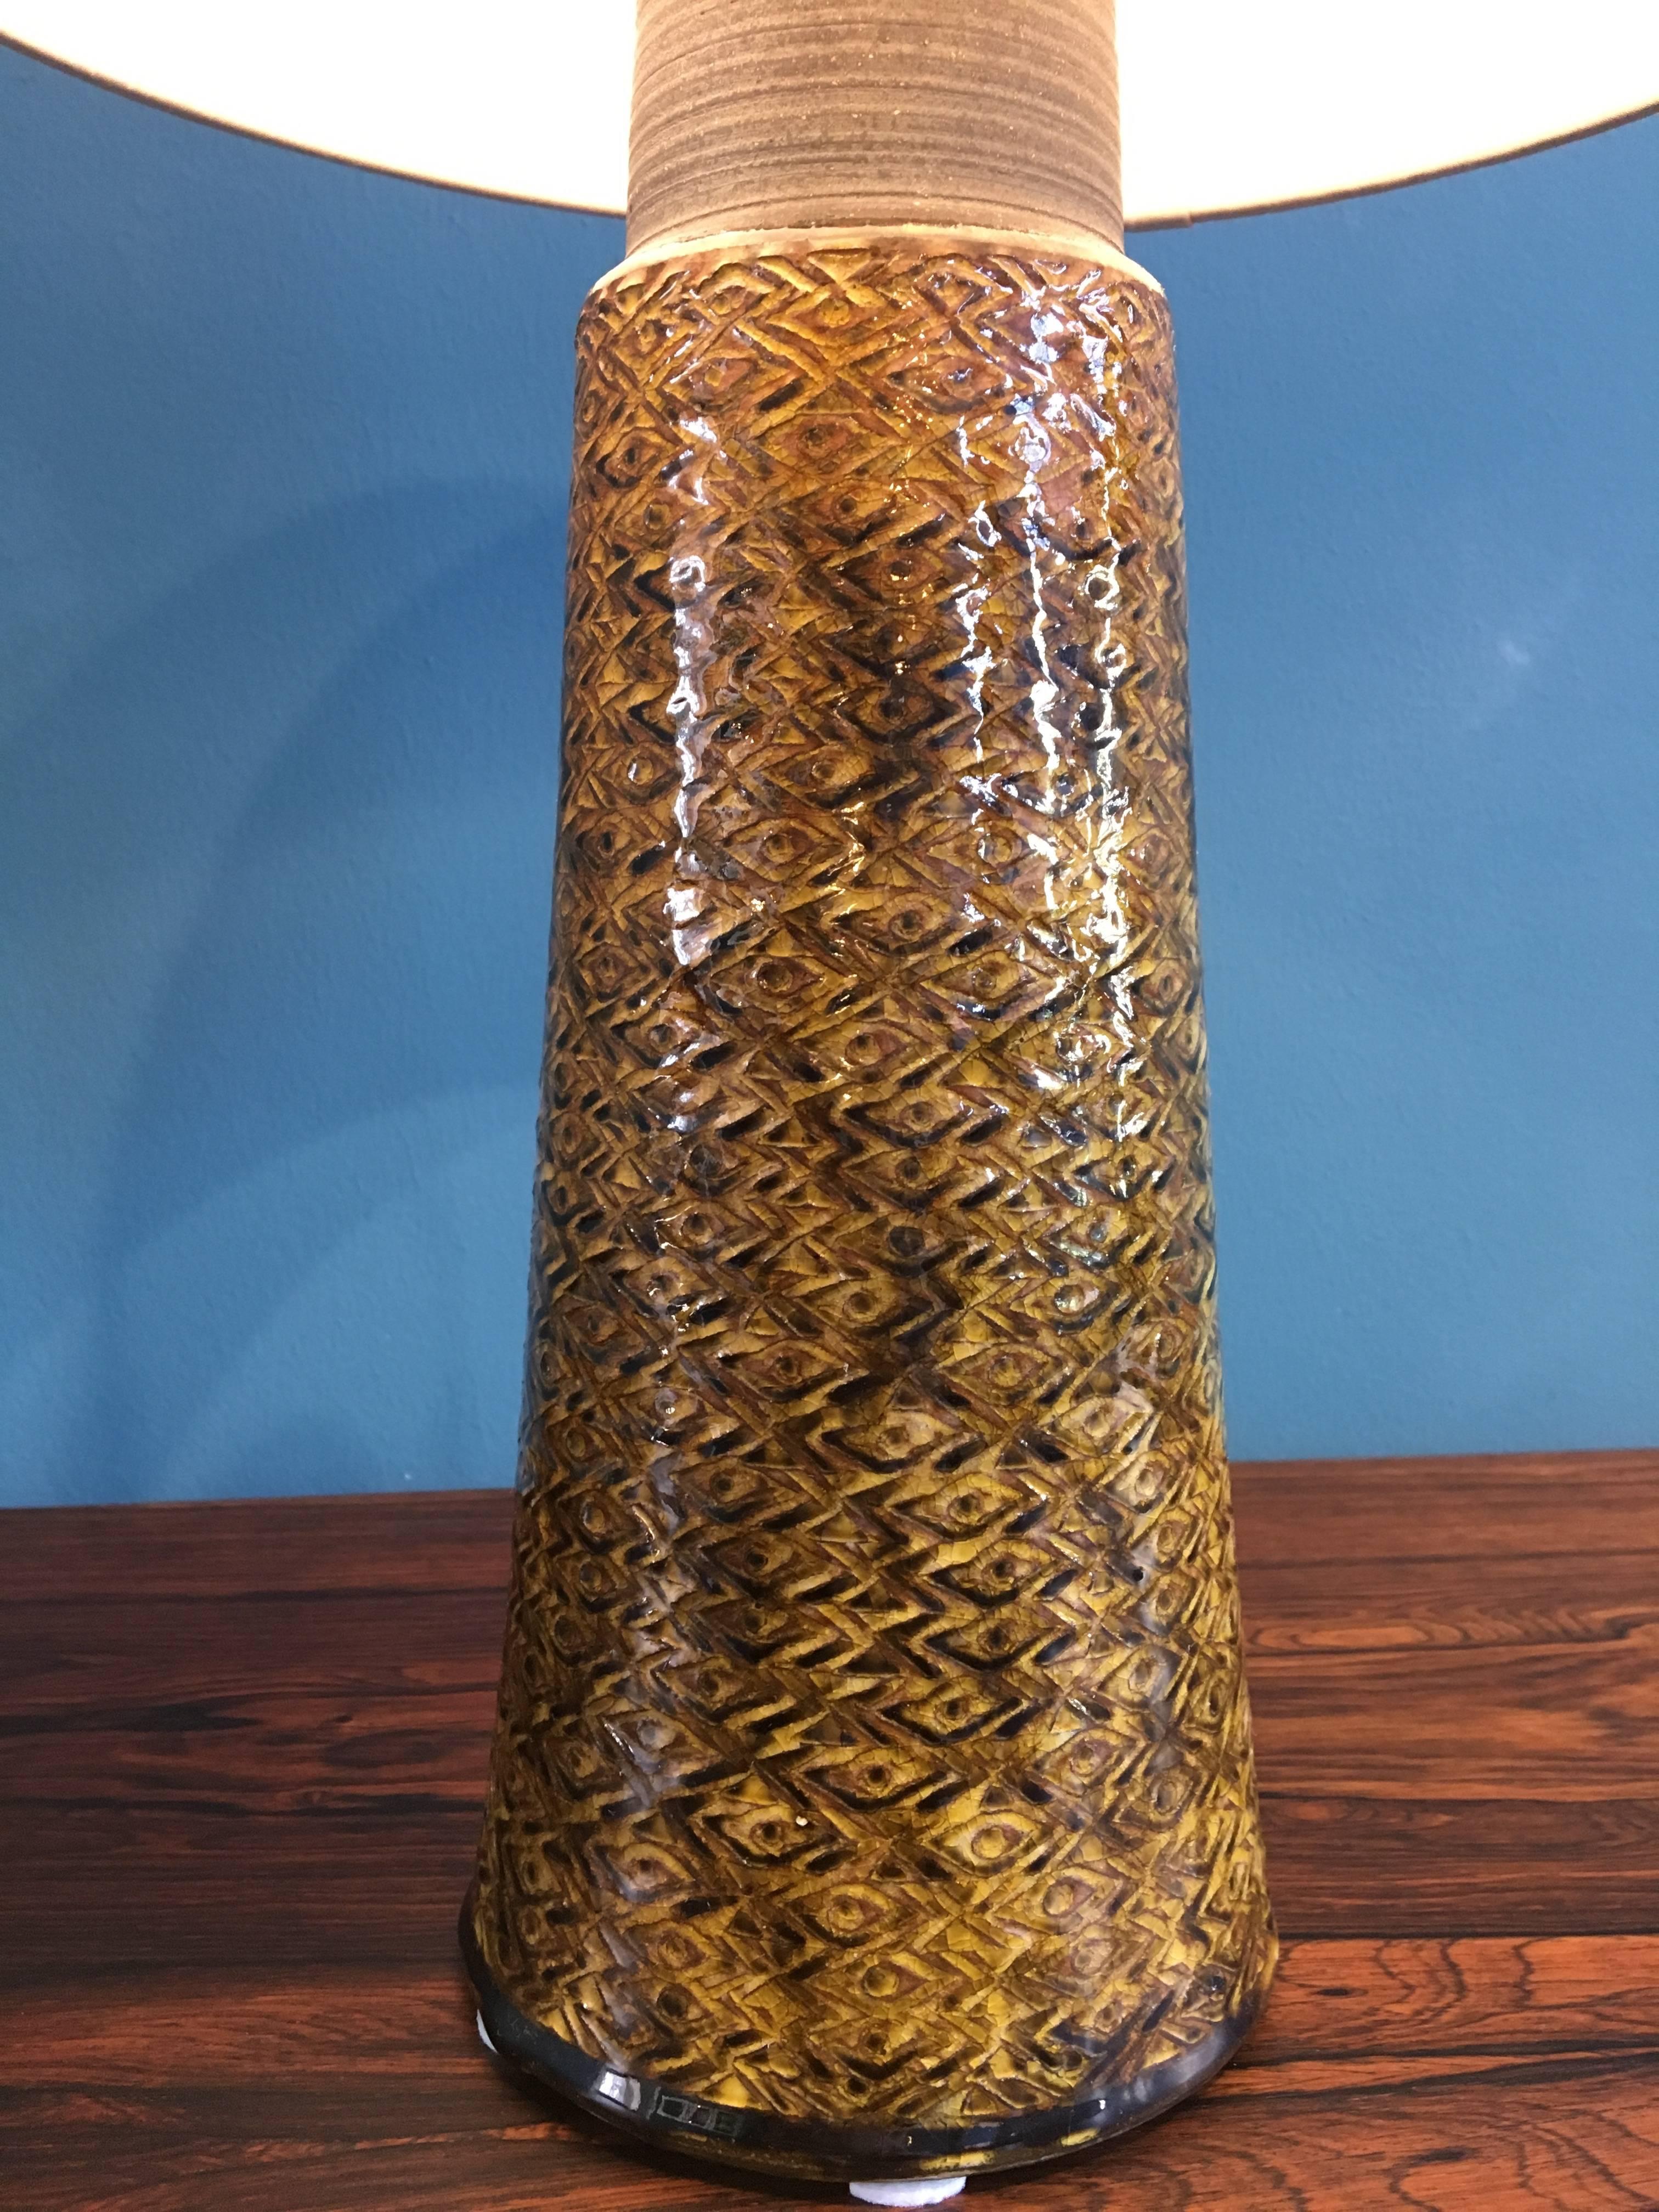 Large Stoneware Table Lamp with Mustard Colored Glazing by Nils Kähler, Denmark 1